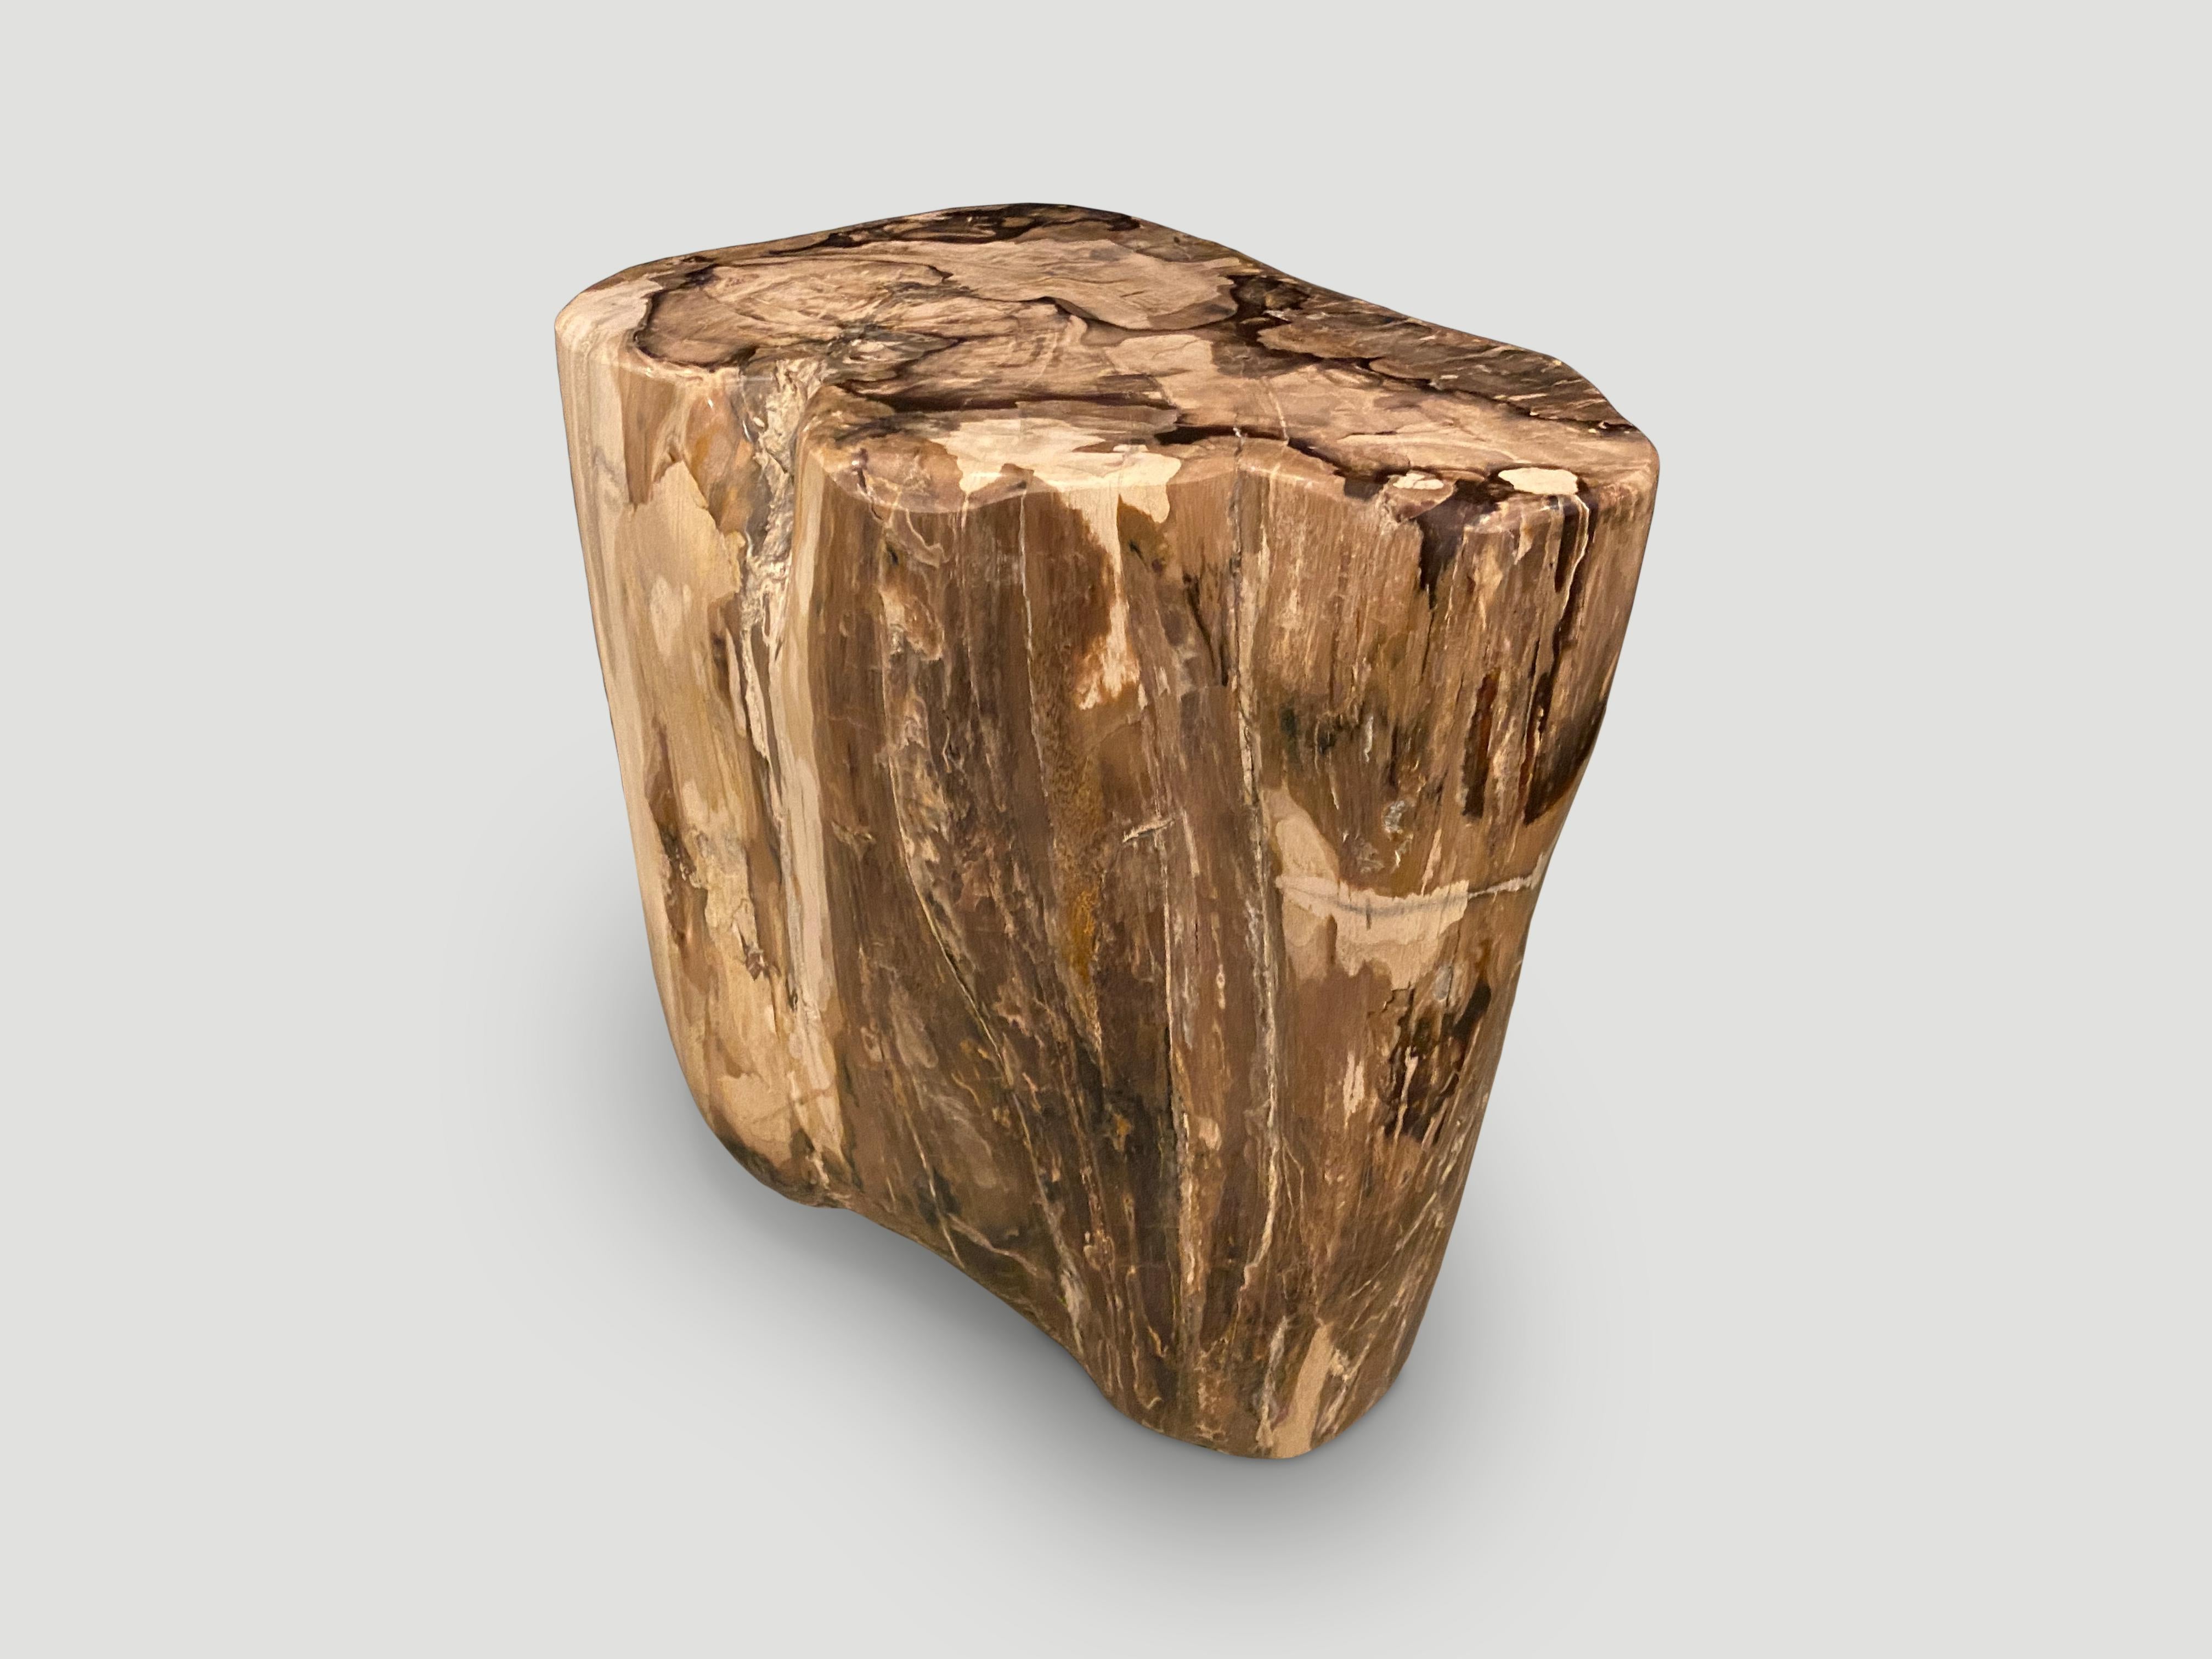 Beautiful earth tones in this petrified wood side table. It’s fascinating how Mother Nature produces these exquisite 40 million year old petrified teak logs with such contrasting colors and natural patterns throughout. Modern yet with so much